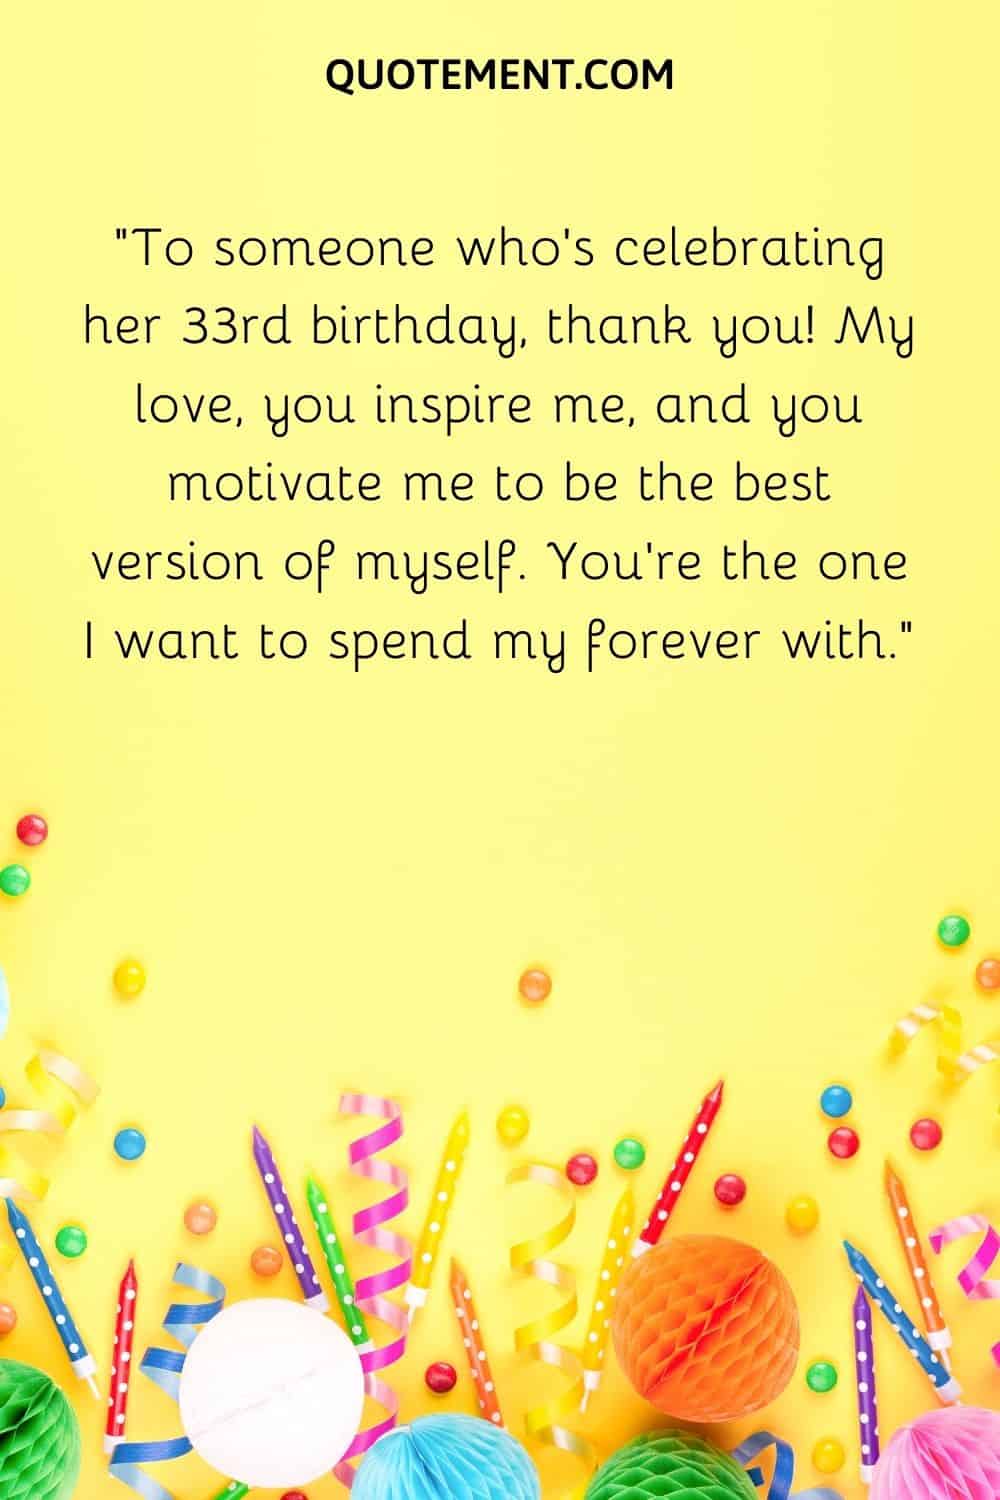 To someone who’s celebrating her 33rd birthday, thank you